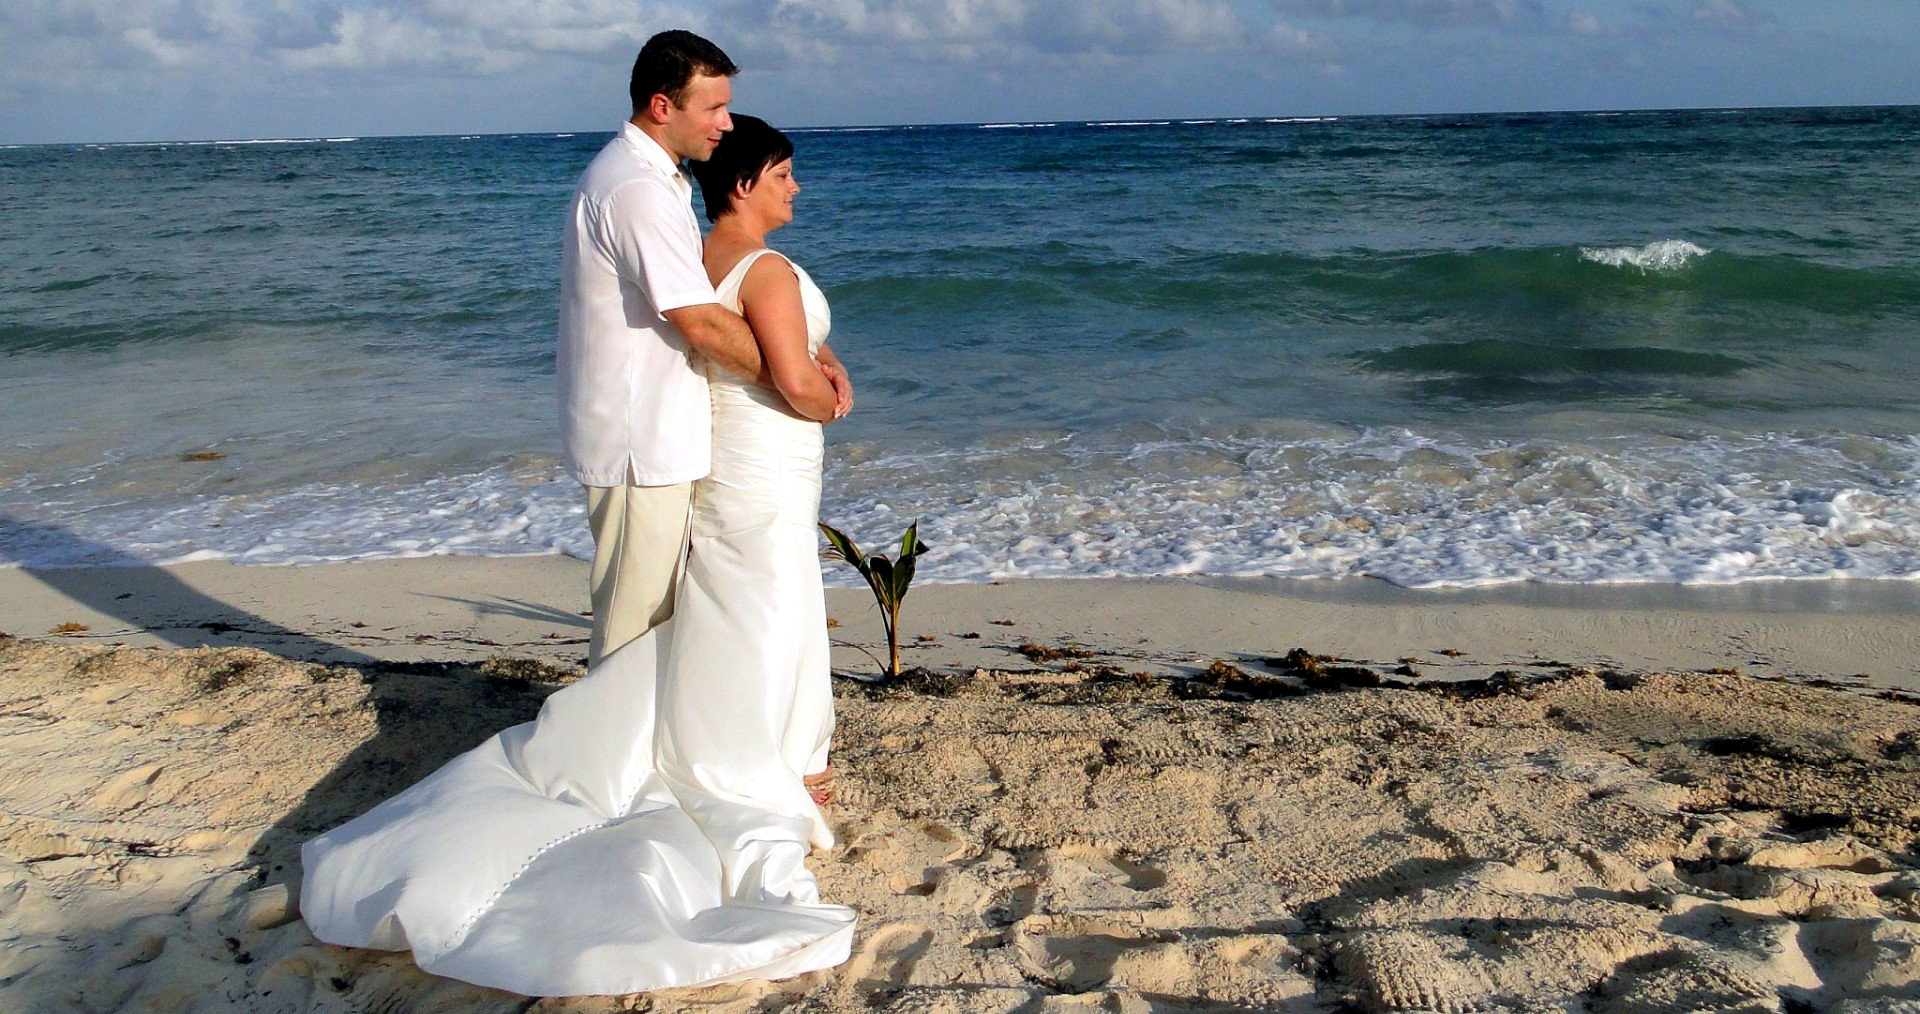 The perfect beach for a wedding